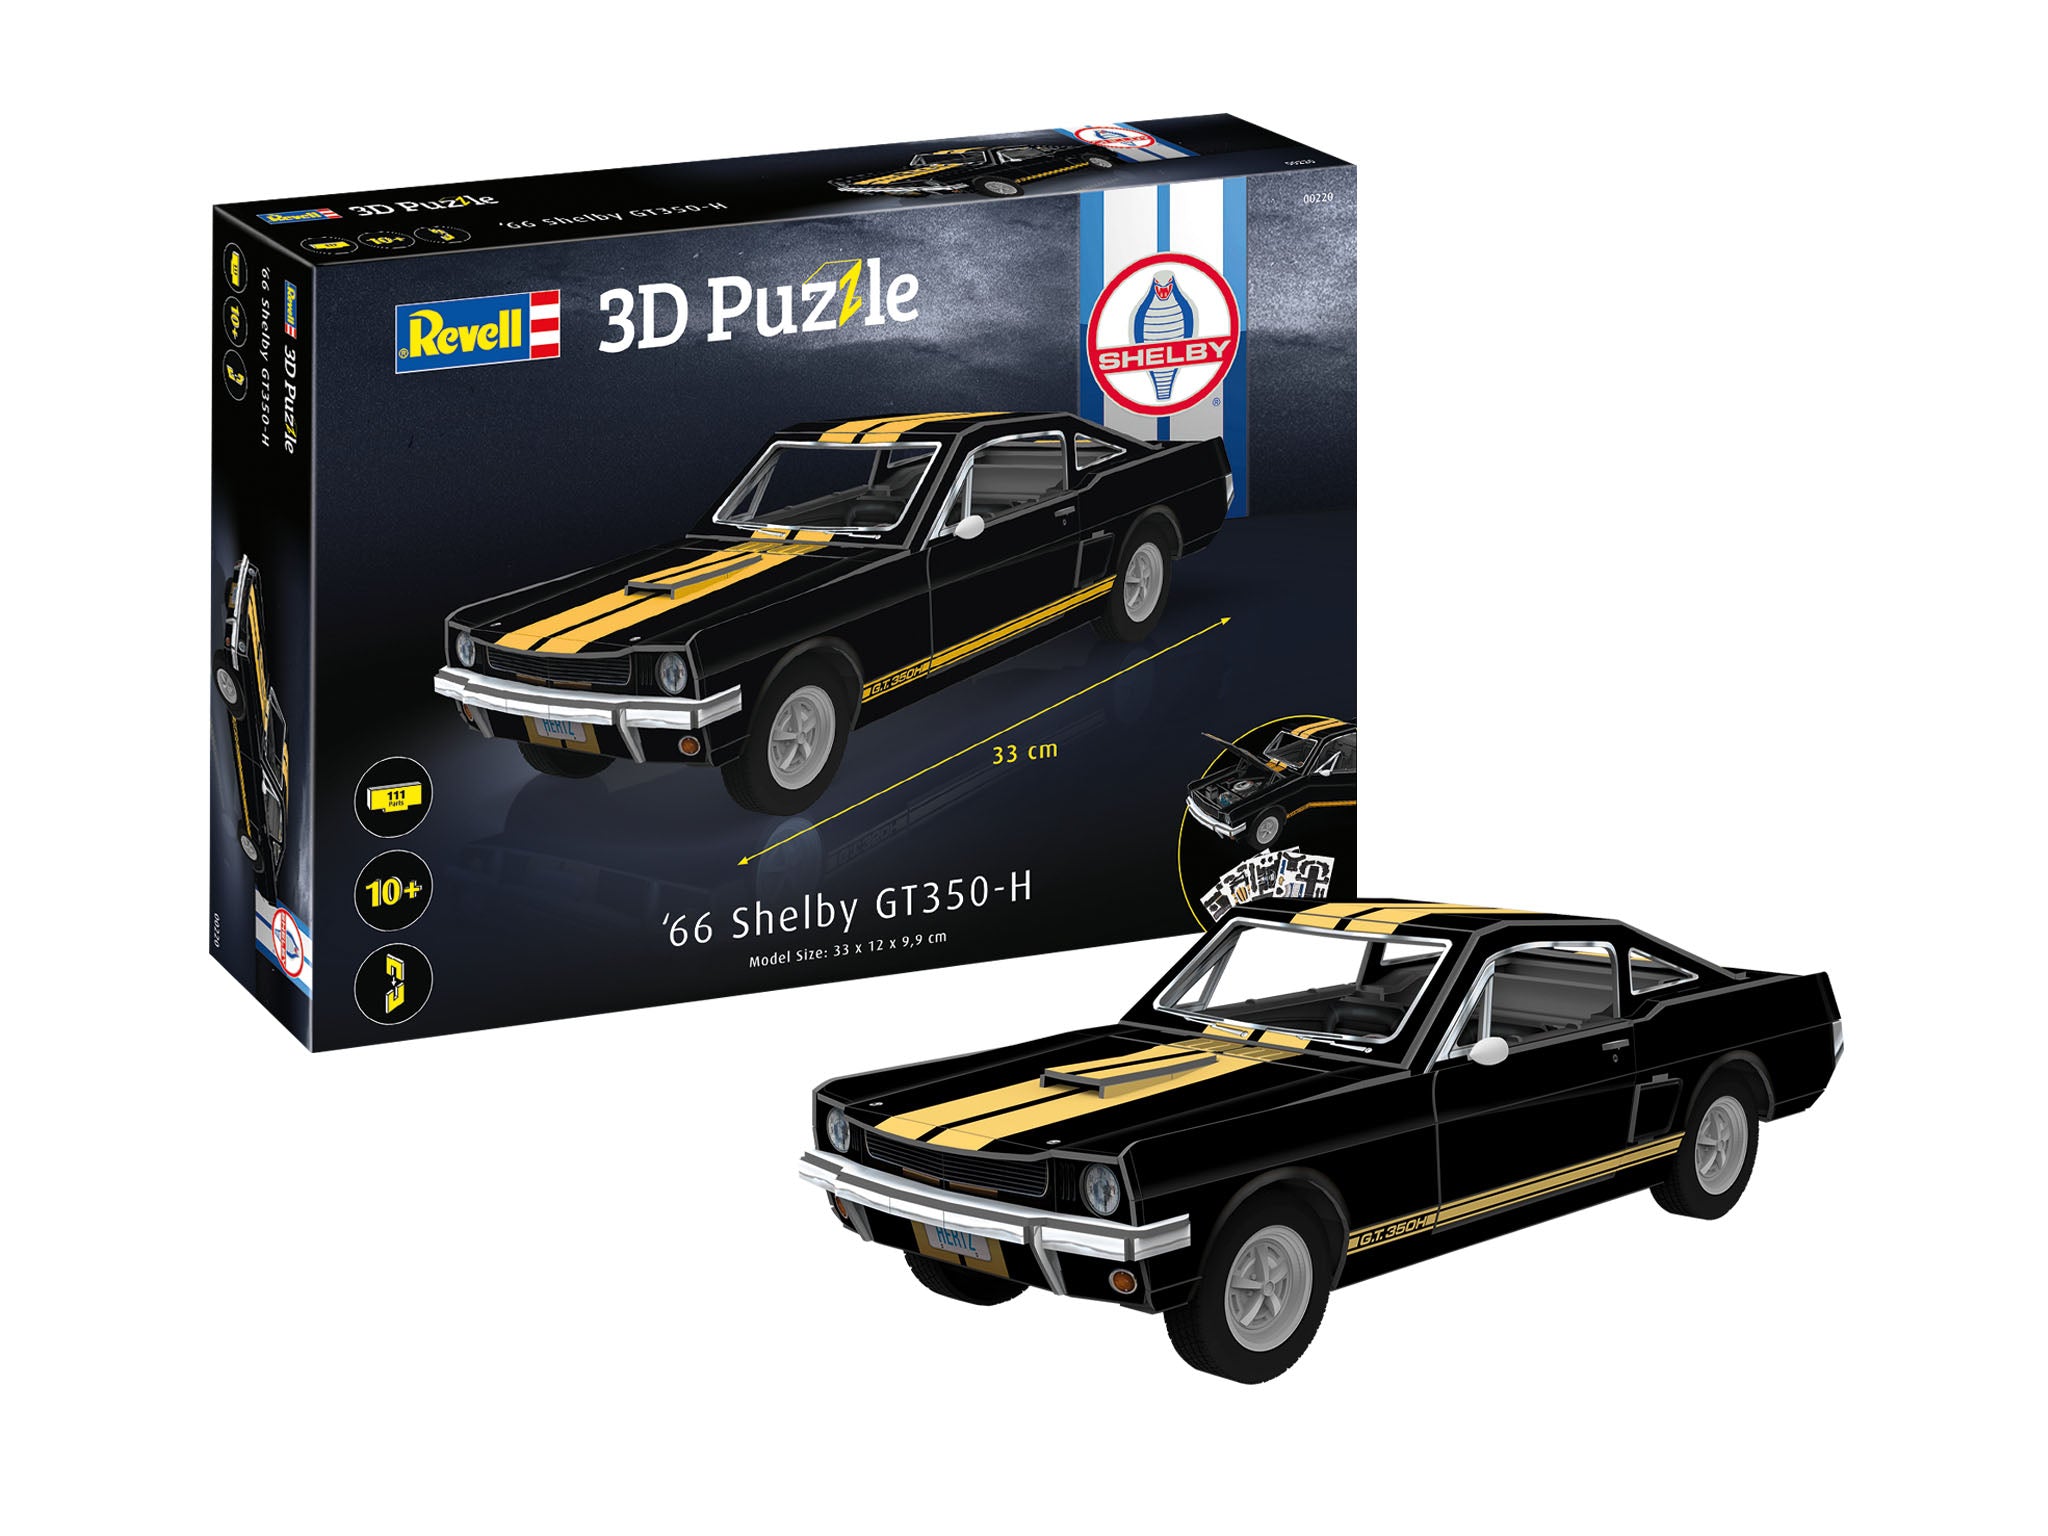 3D Puzzle Revell 66 Shelby GT350-H